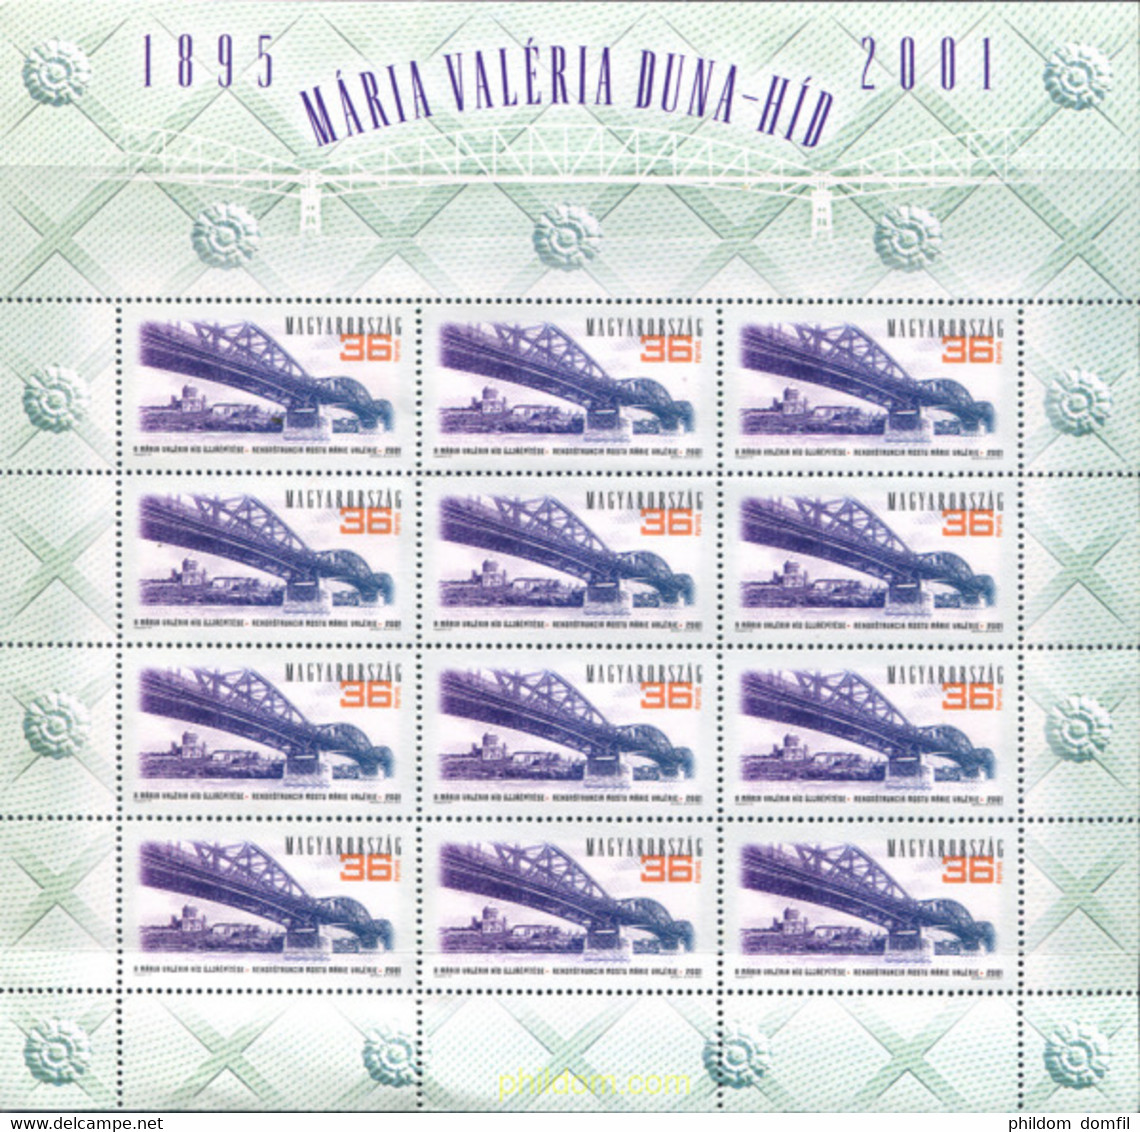 325263 MNH HUNGRIA 2001 RECONSTRUCCION DEL PUENTE MARIE-VALERIE - Used Stamps